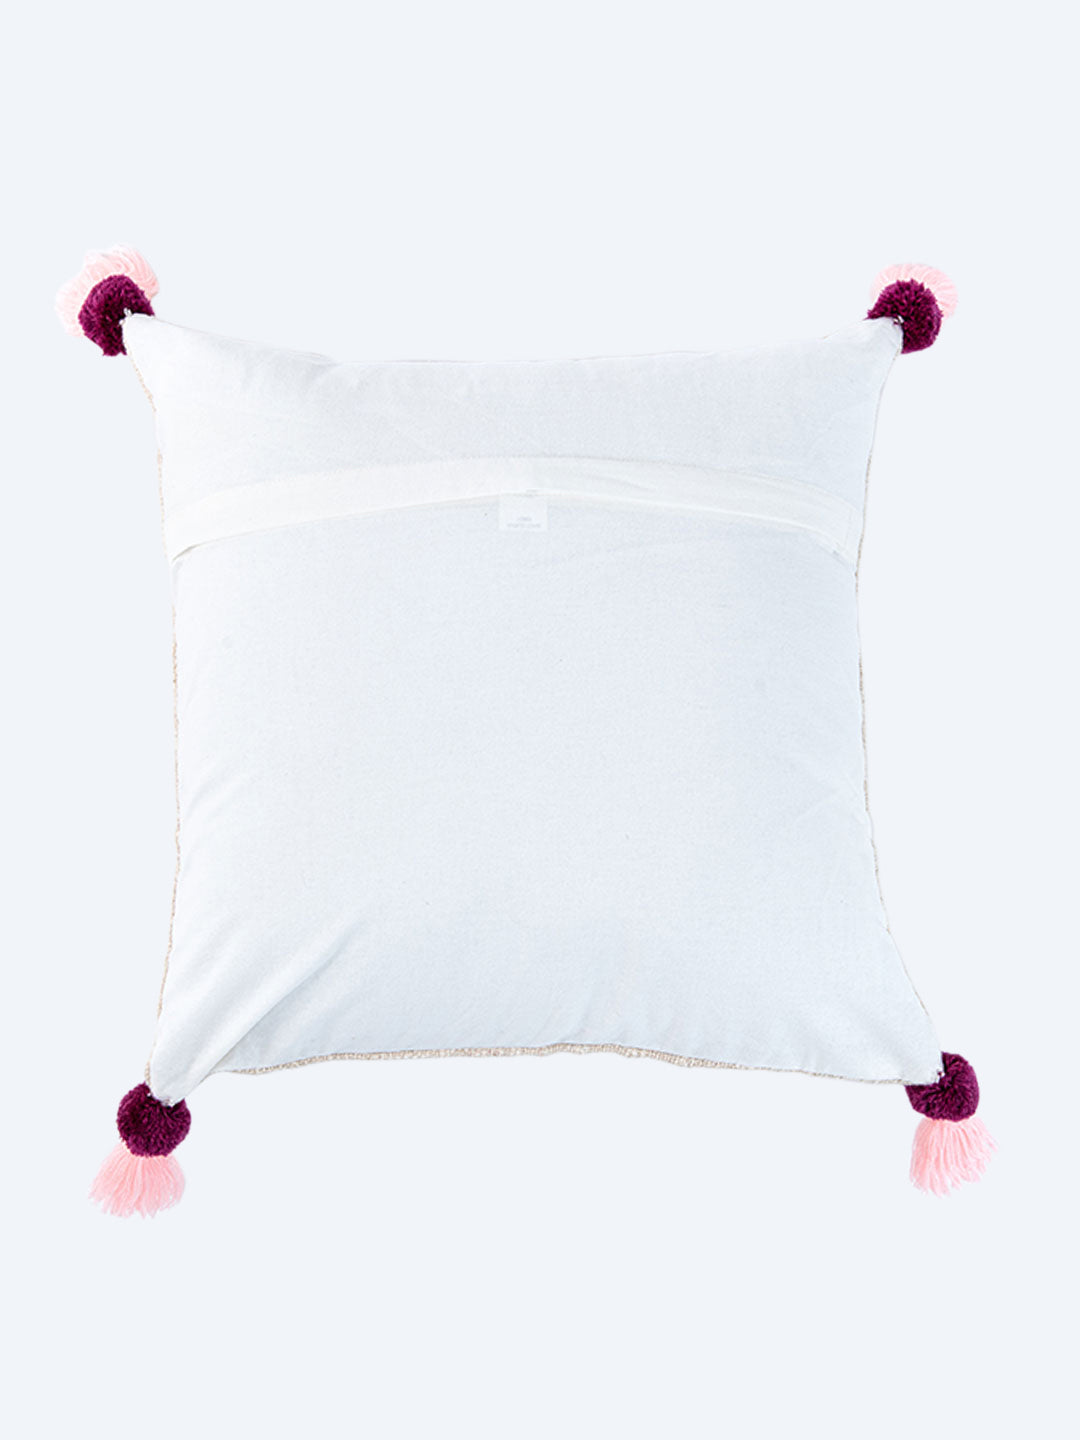 rectangle cushion covers